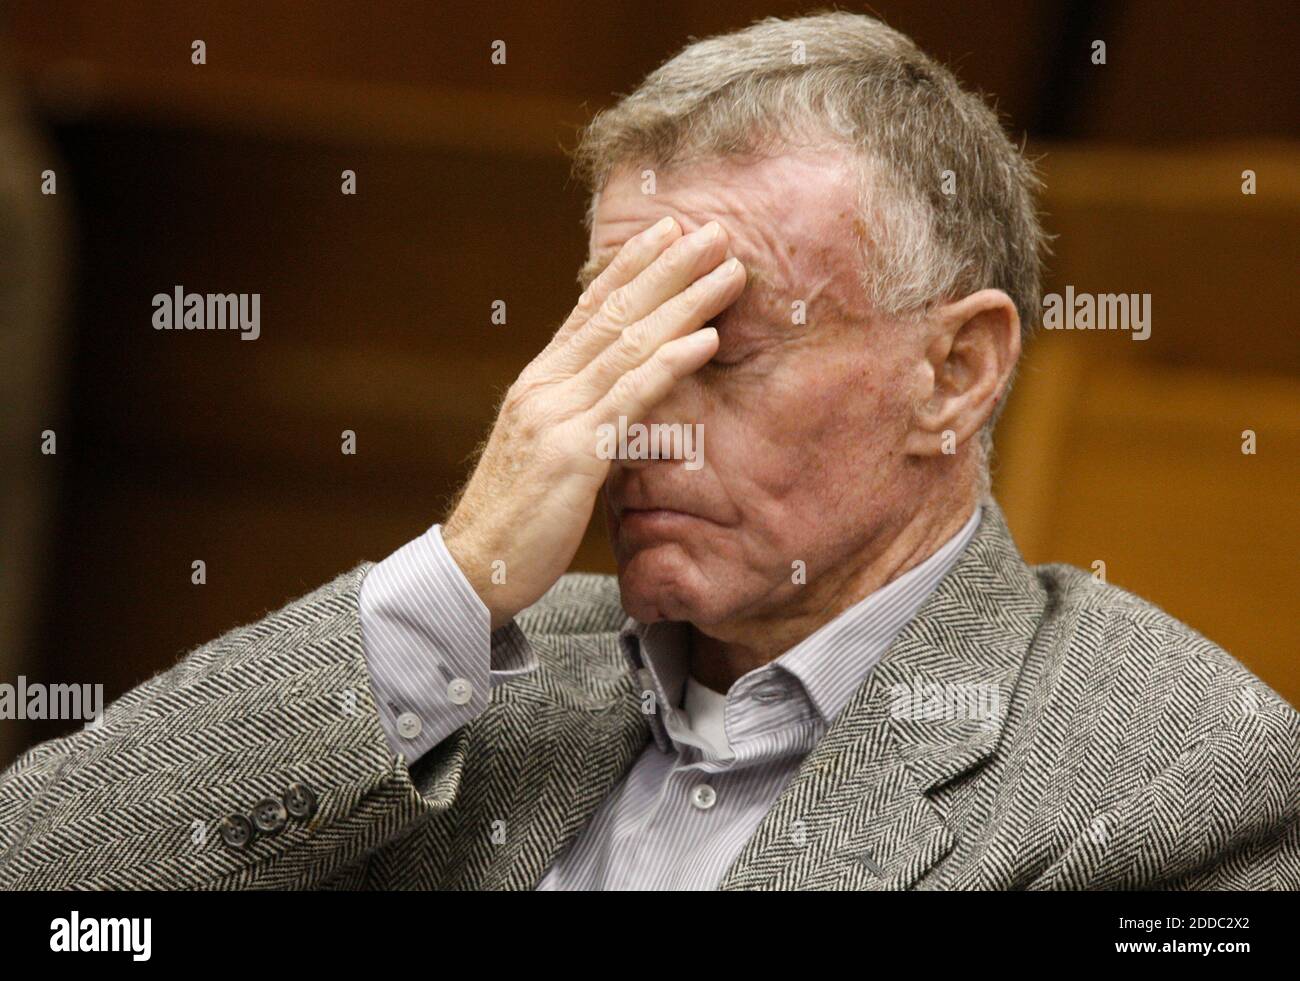 NO FILM, NO VIDEO, NO TV, NO DOCUMENTARY - Michael Peterson reacts after Judge Orlando Hudson ruled in Durham, North Carolina, USA on December 14, 2011, that the he will get a new trial. Hudson found that former SBI agent Duane Deaver misled the judge and jury in 2003, when his testimony helped convict Peterson in the death of his wife, Kathleen Peterson. Photo by Shawn Rocco/Raleigh News and Observer/MCT/ABACAPRESS.COM Stock Photo